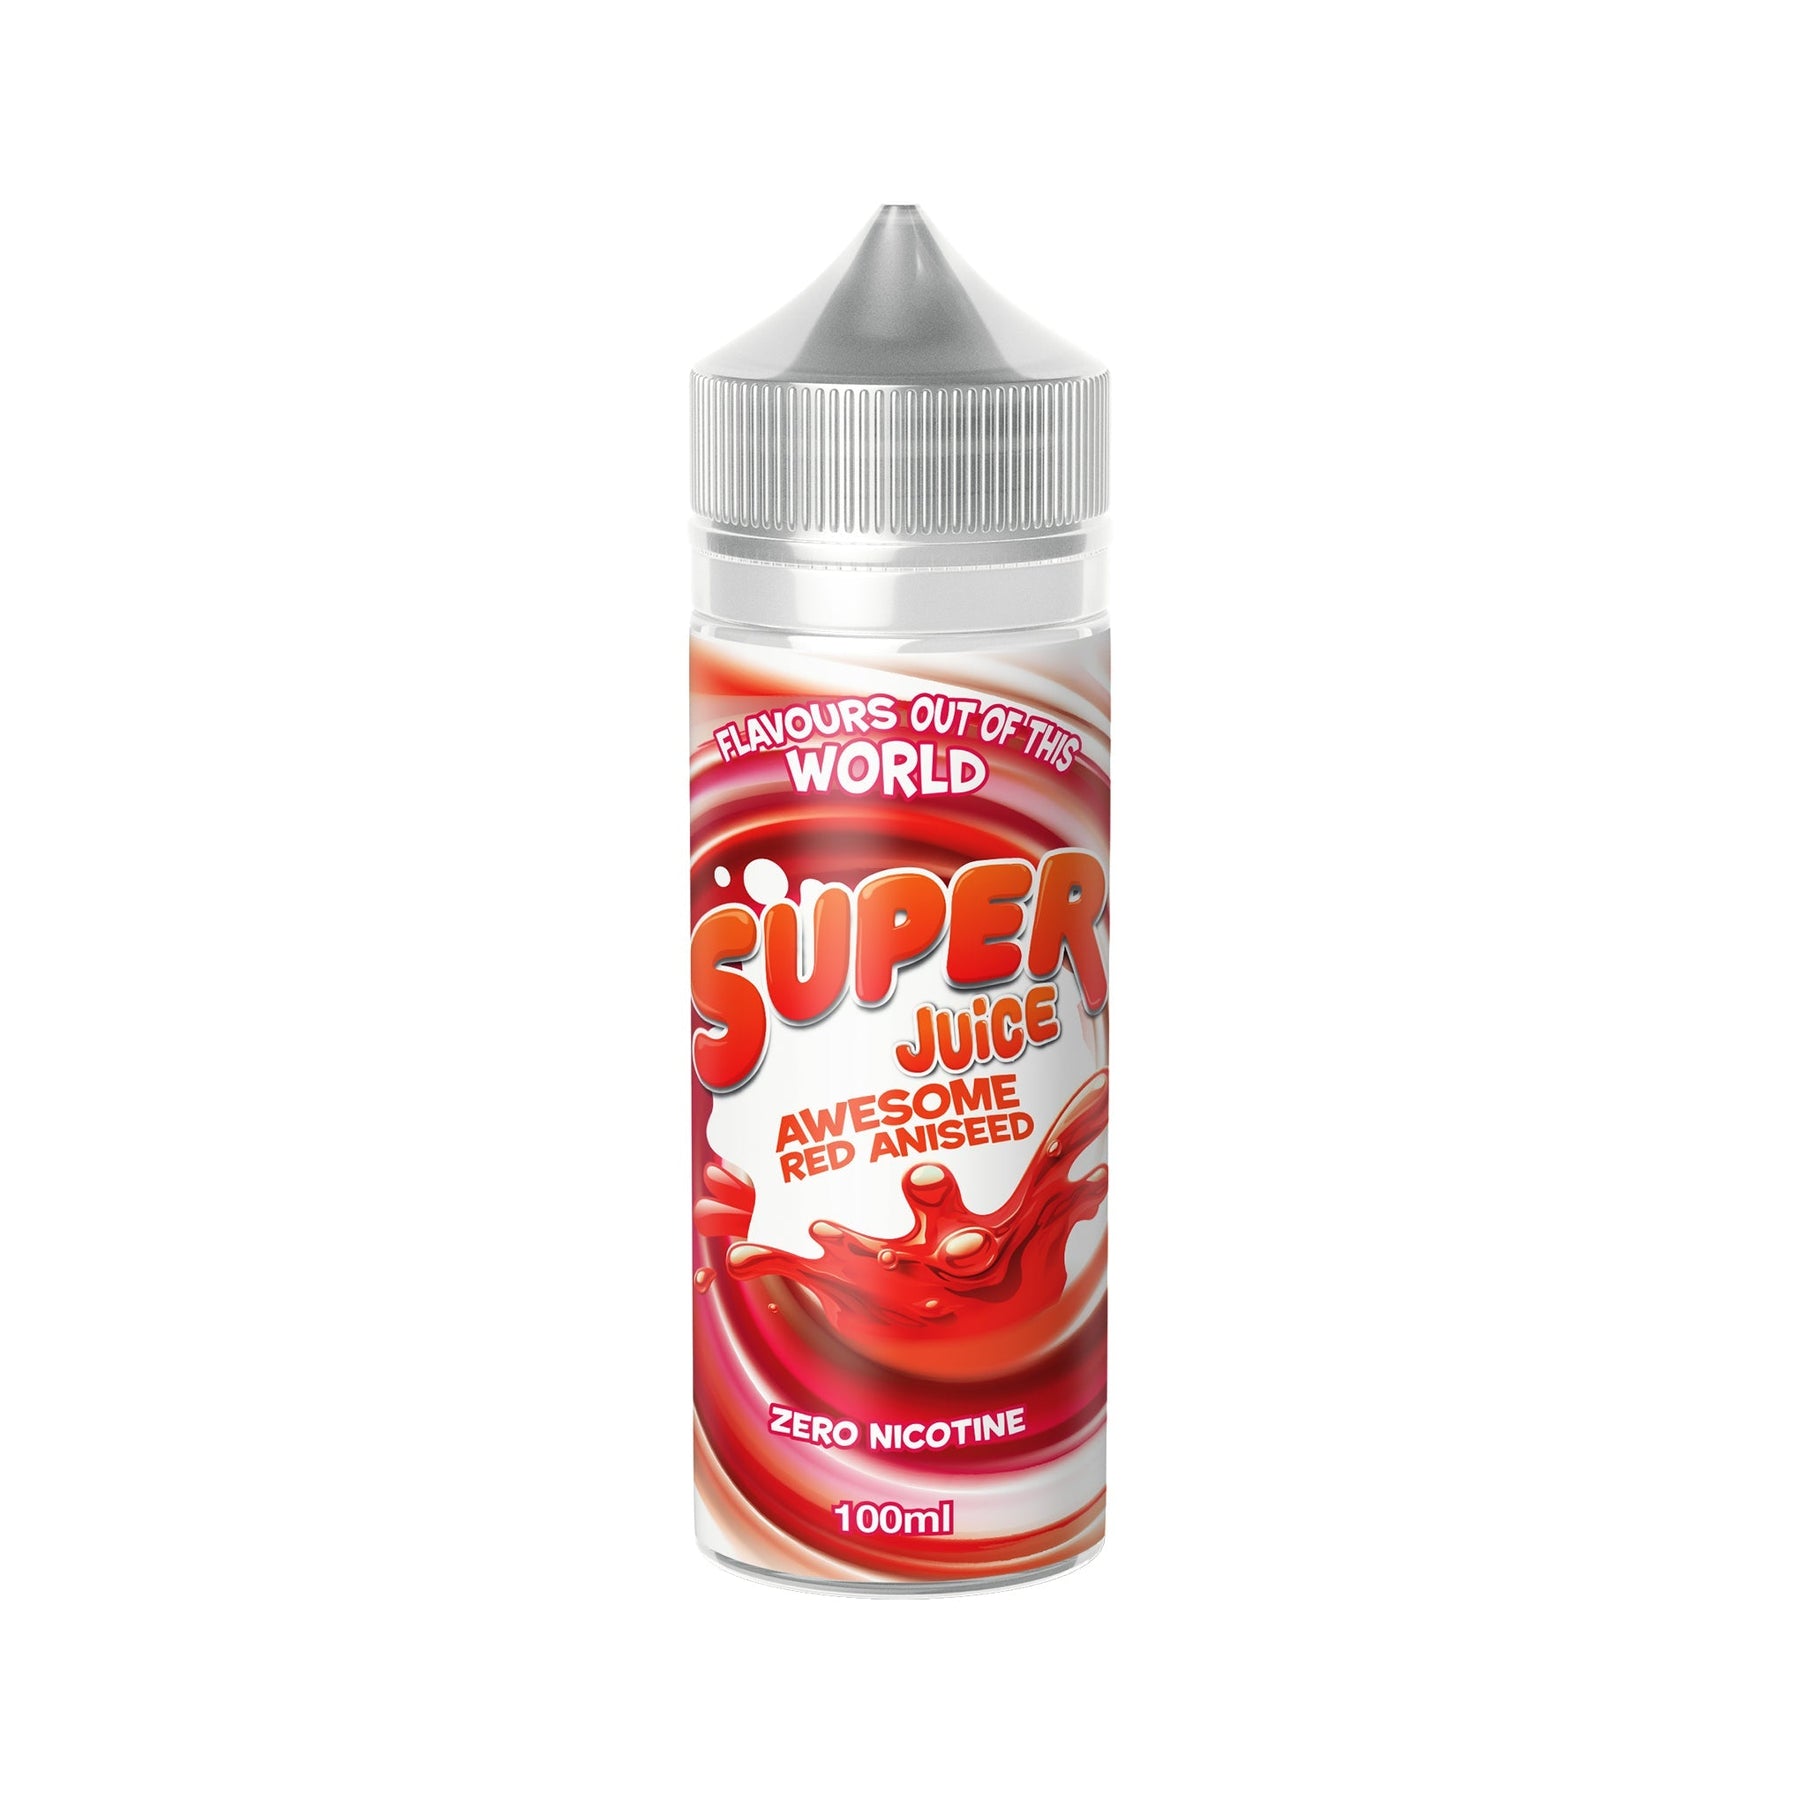 Super Juice Short Fill E-Liquid by IVG Awesome Red Aniseed 